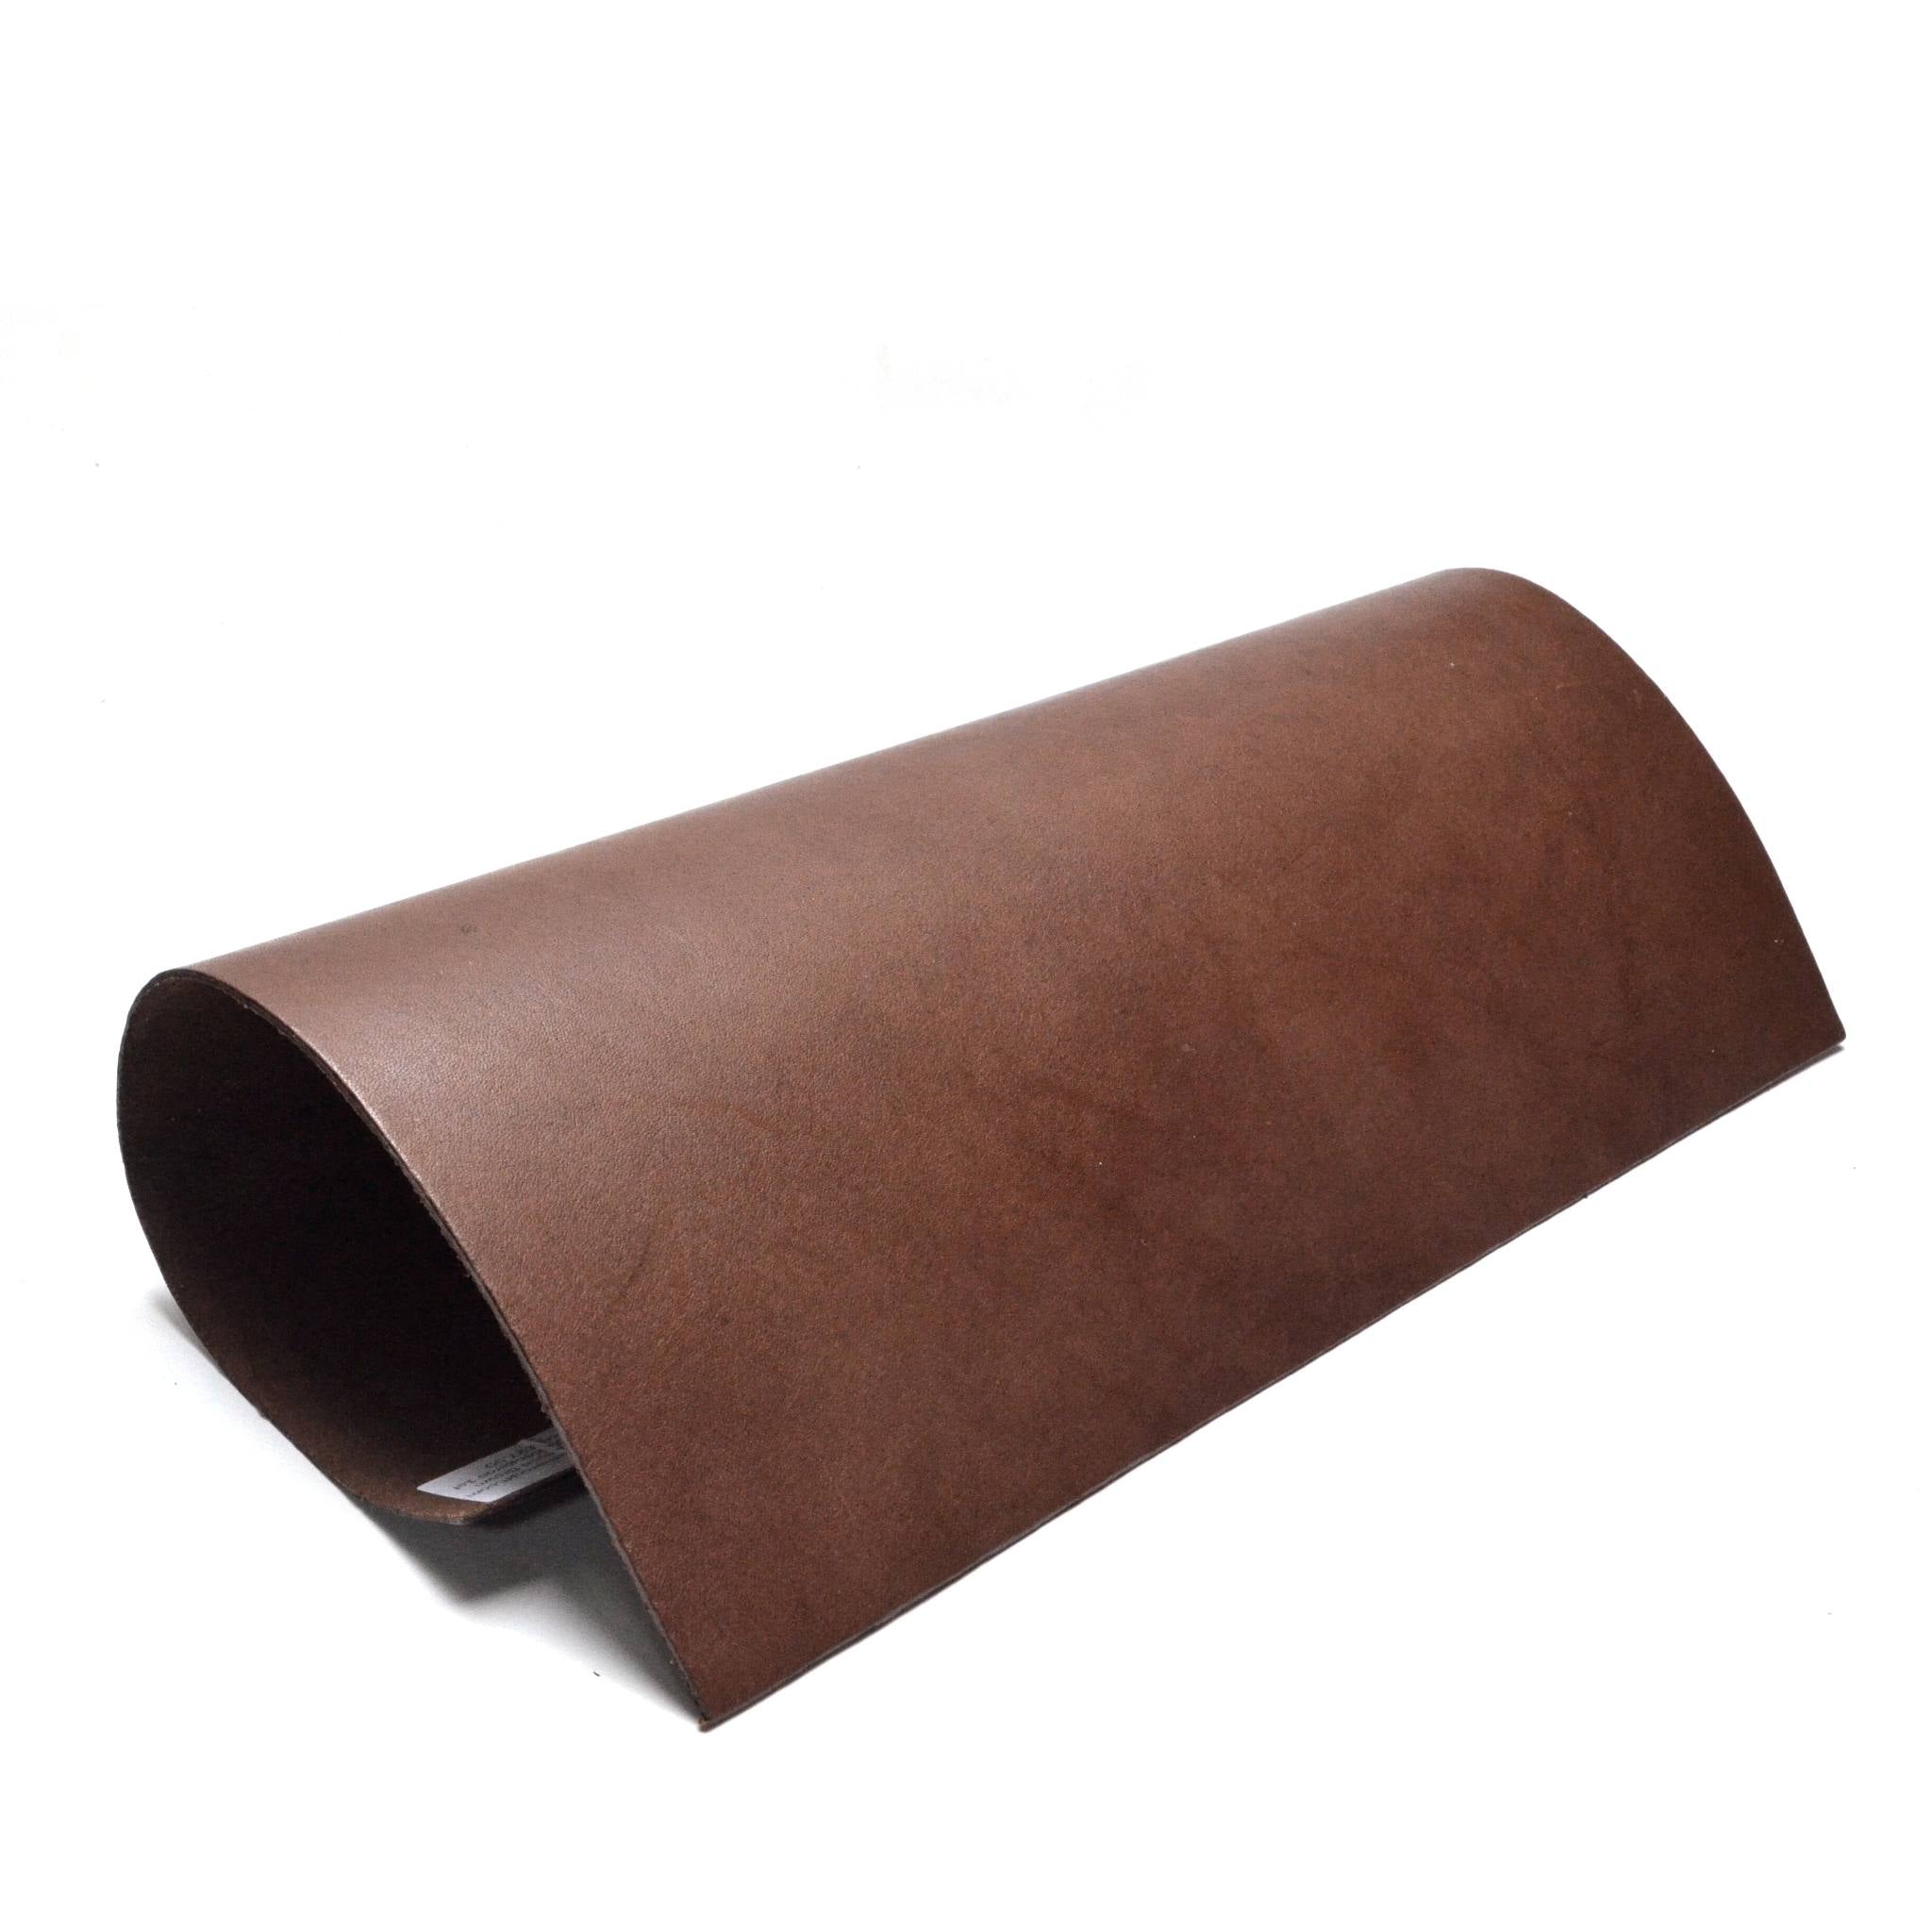 Dyed brown vegetable tanned kangaroo leather ideal for falconry, wallet making and more